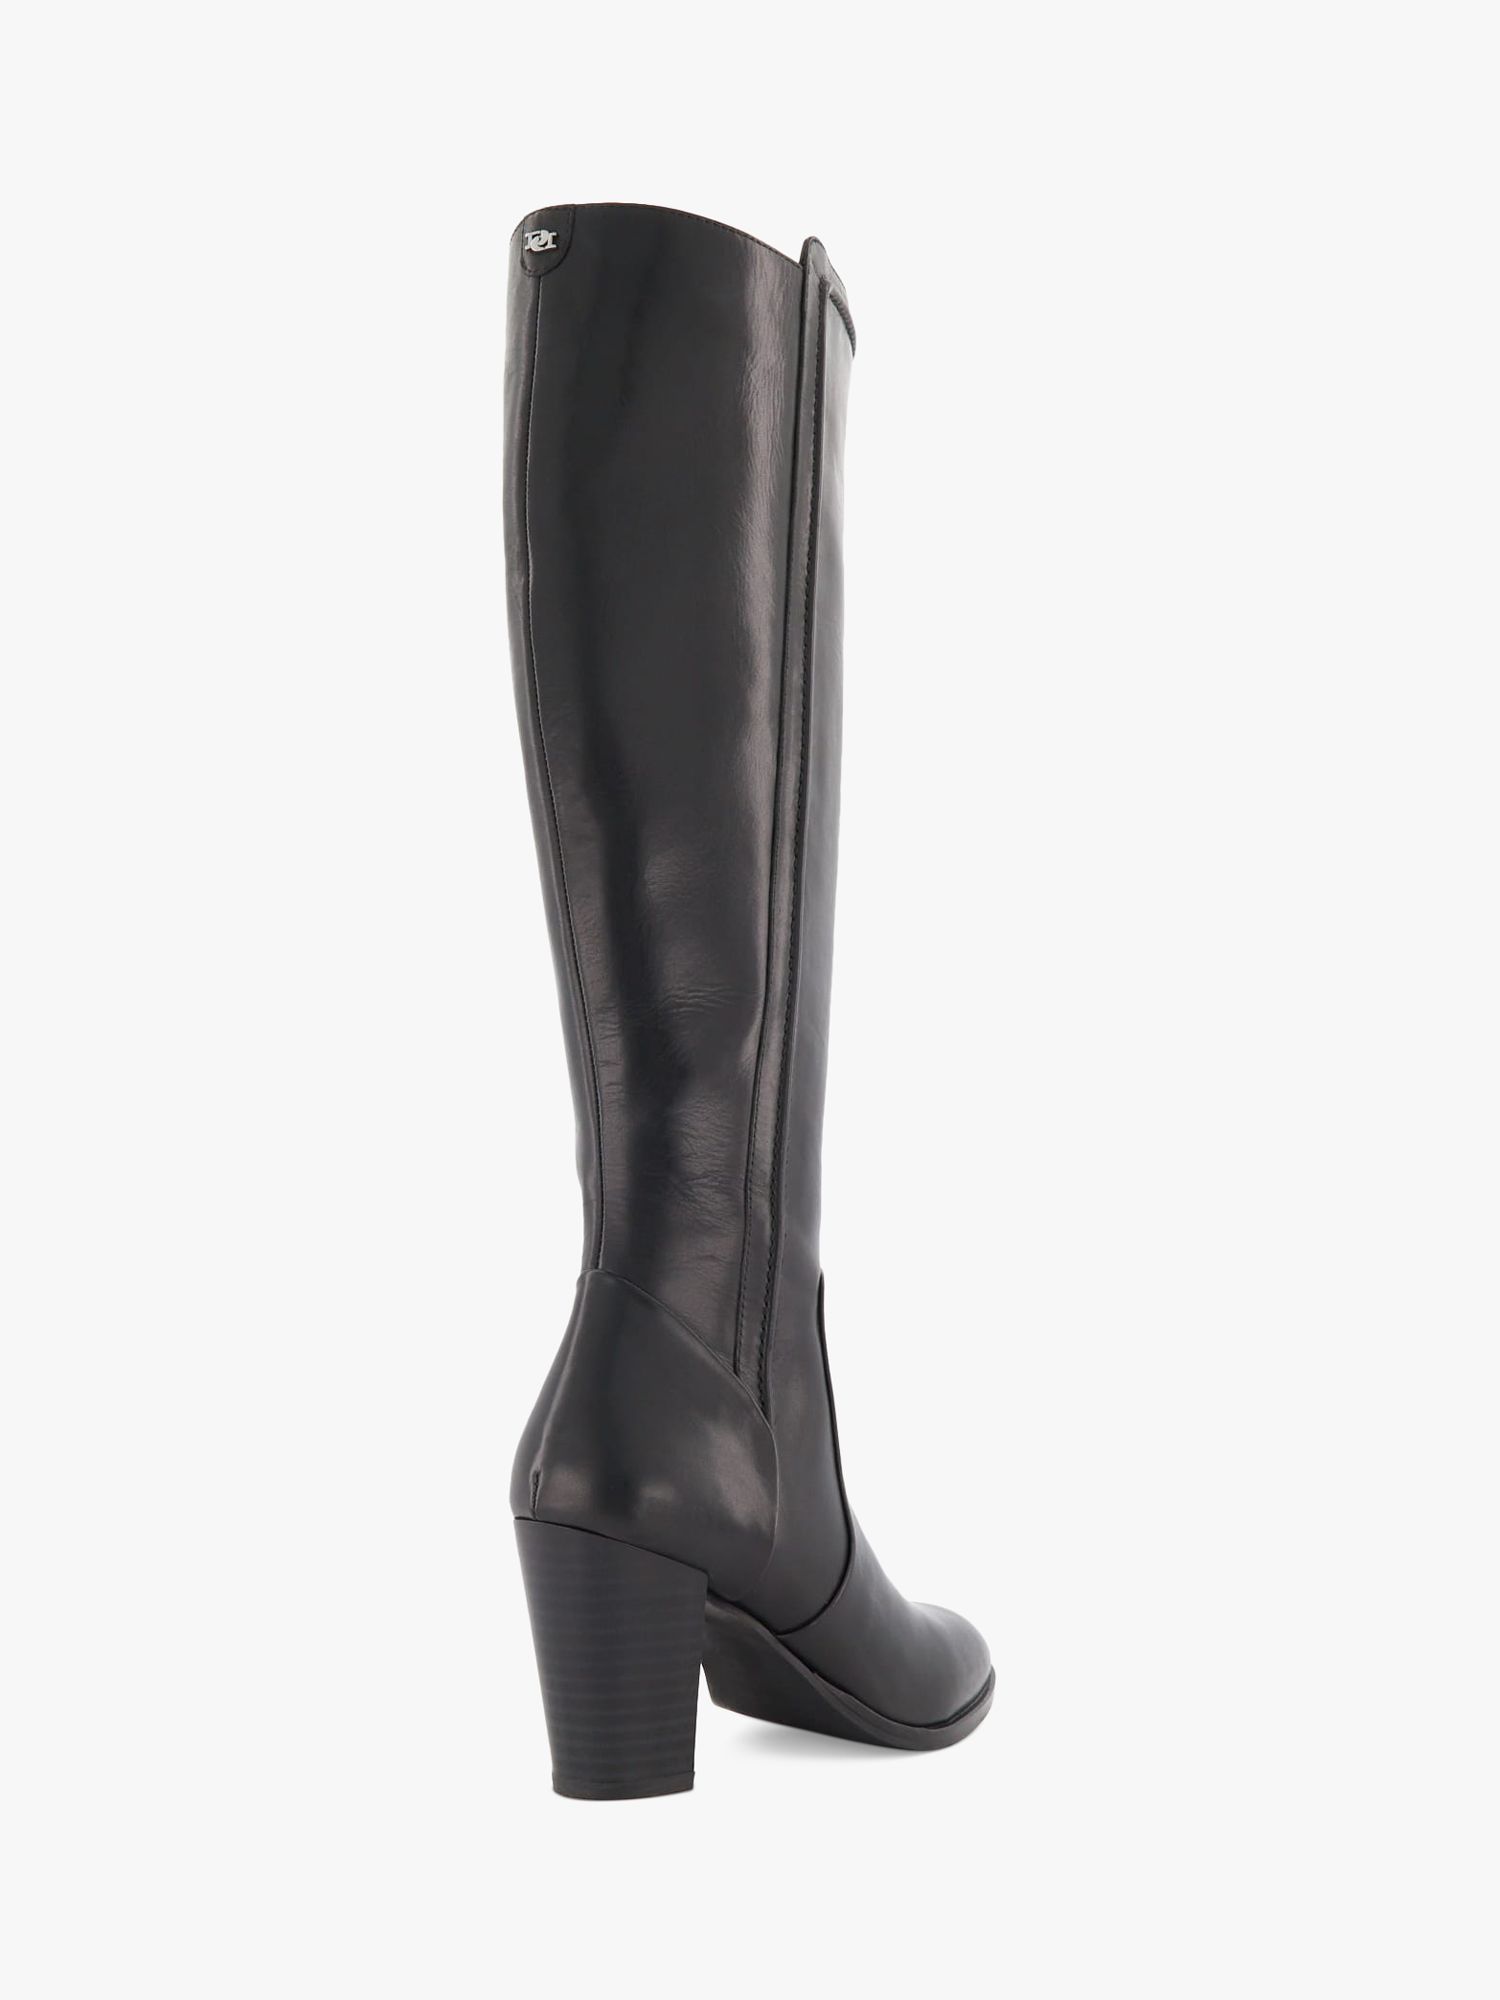 Dune Tippy 2 Leather Knee High Boots, Black, EU36